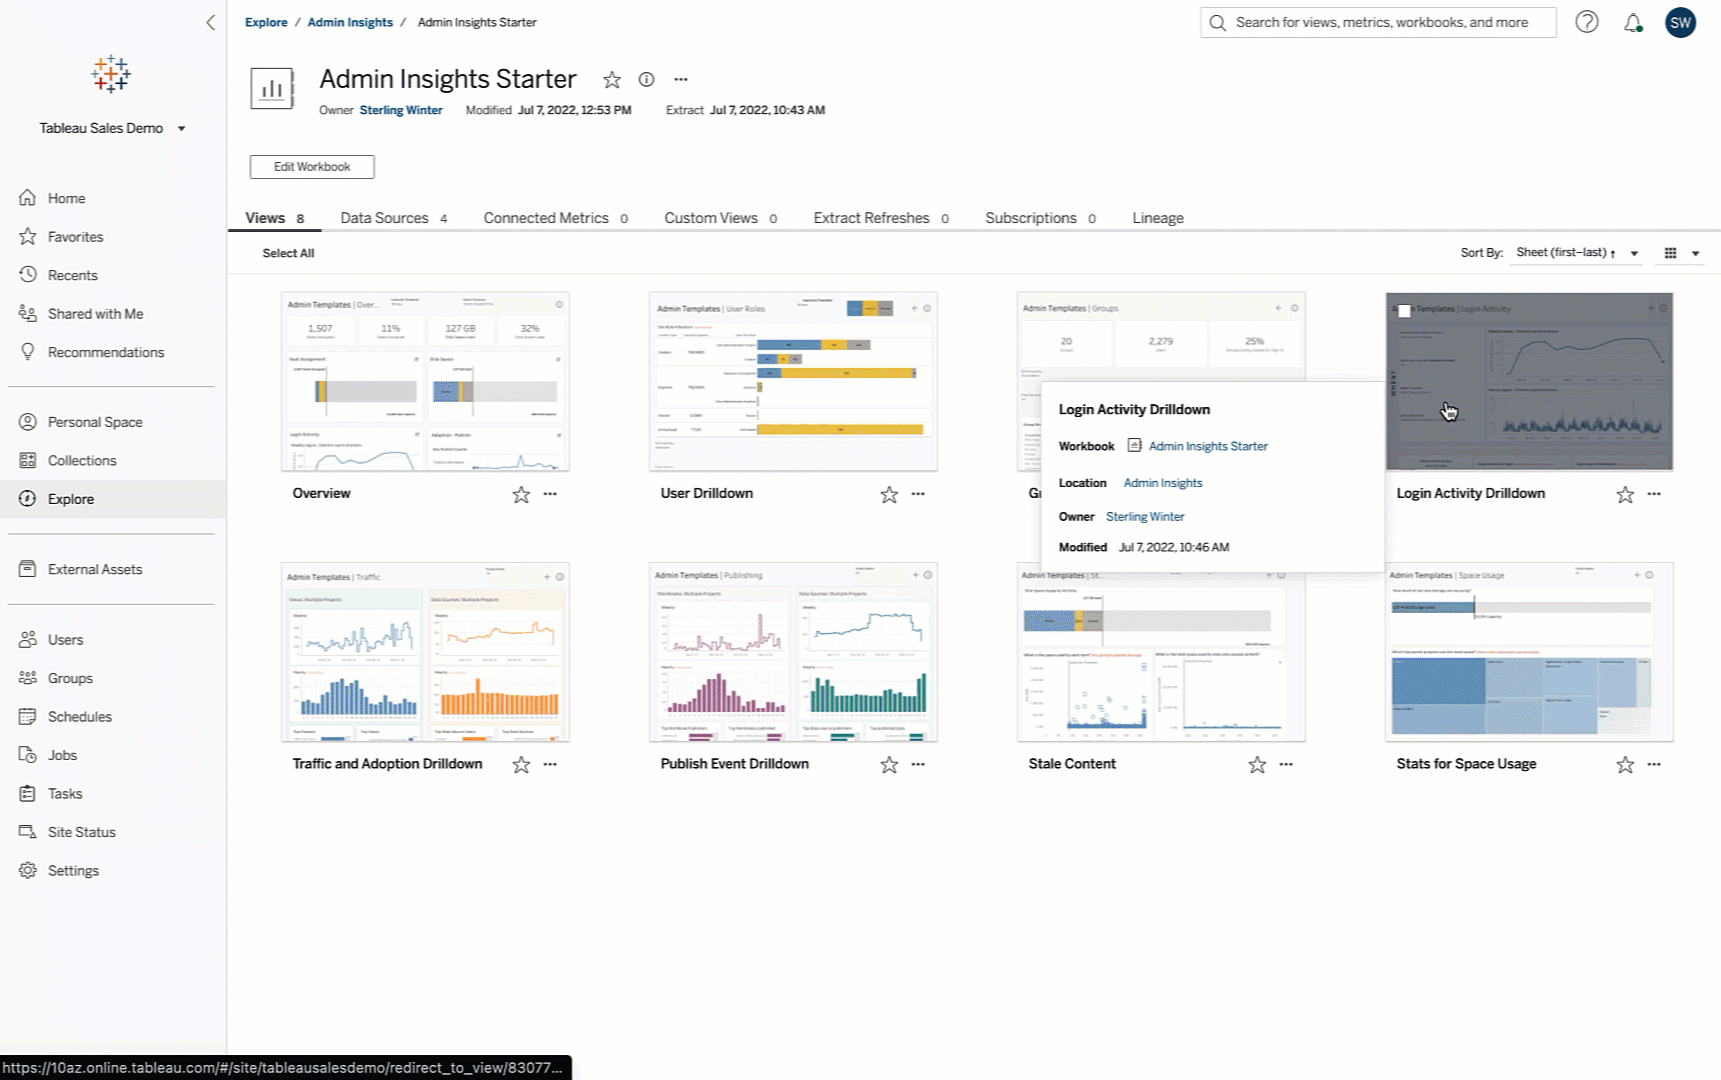 User exploring the Admin Insights project